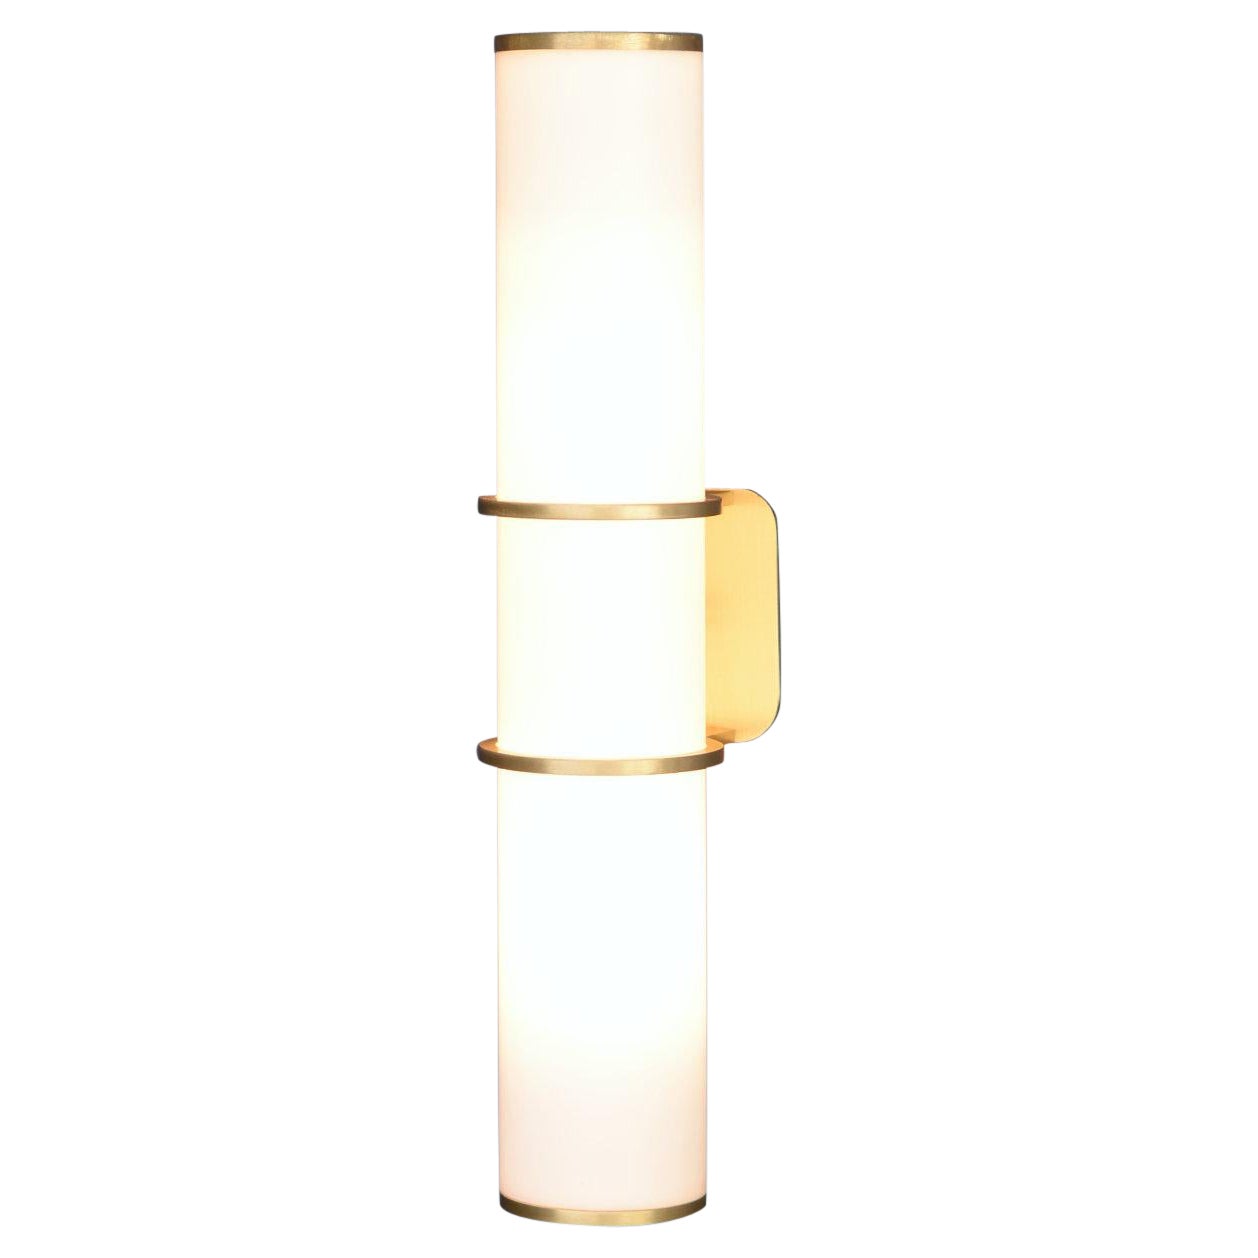 LUCERNA Modern Wall Light in Brushed Brass, IP44 Rated, Made in Britain